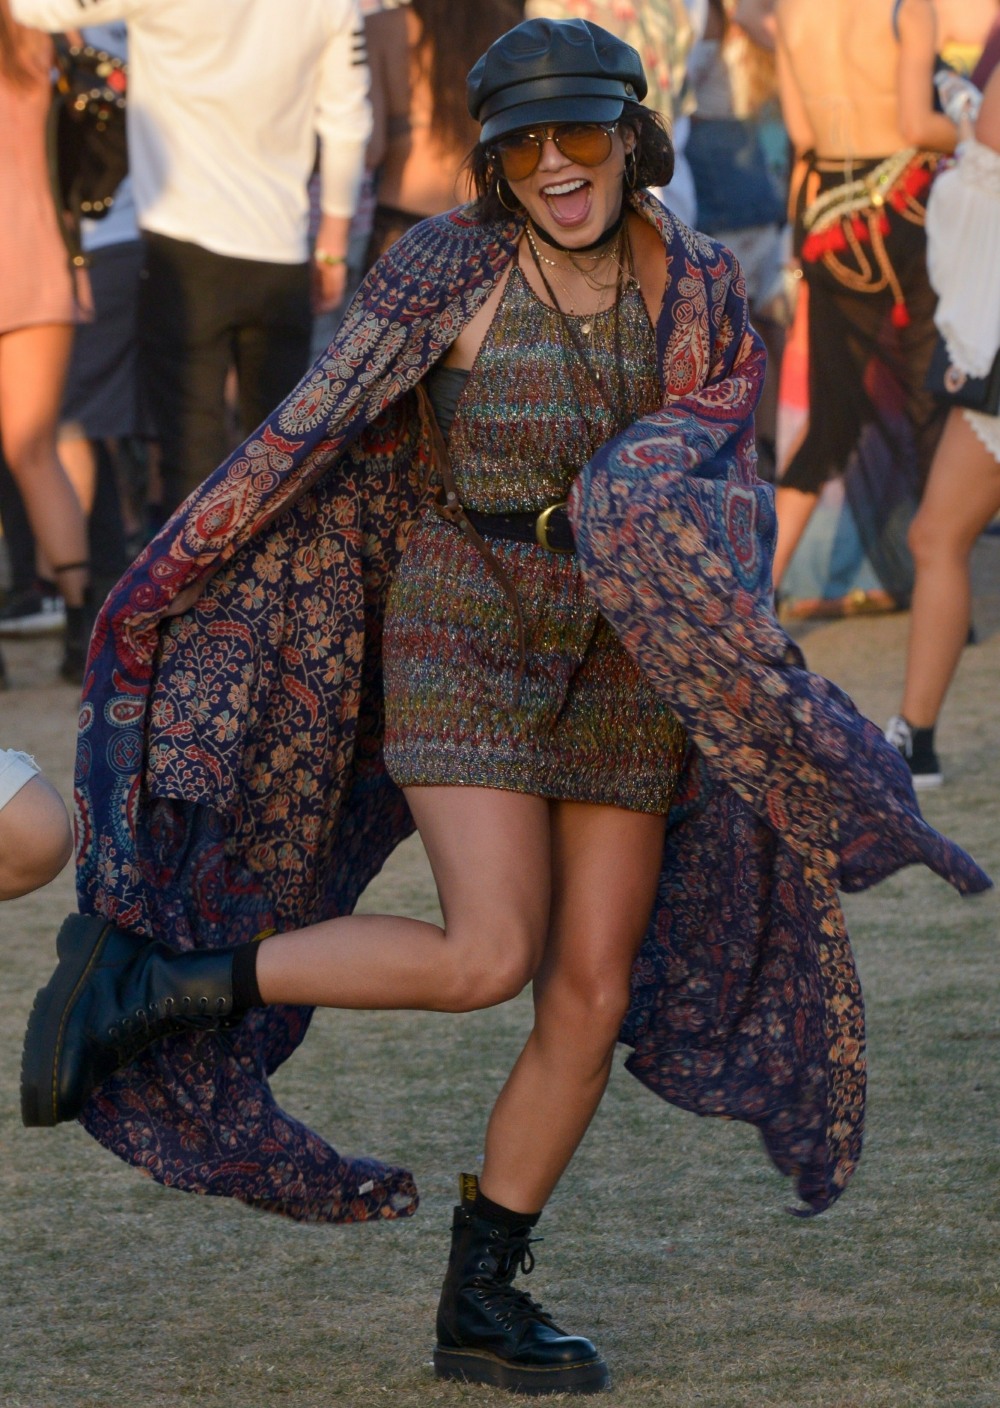 Vanessa Hudgens dances her heart out on the Polo Fields during Coachella Weekend 2